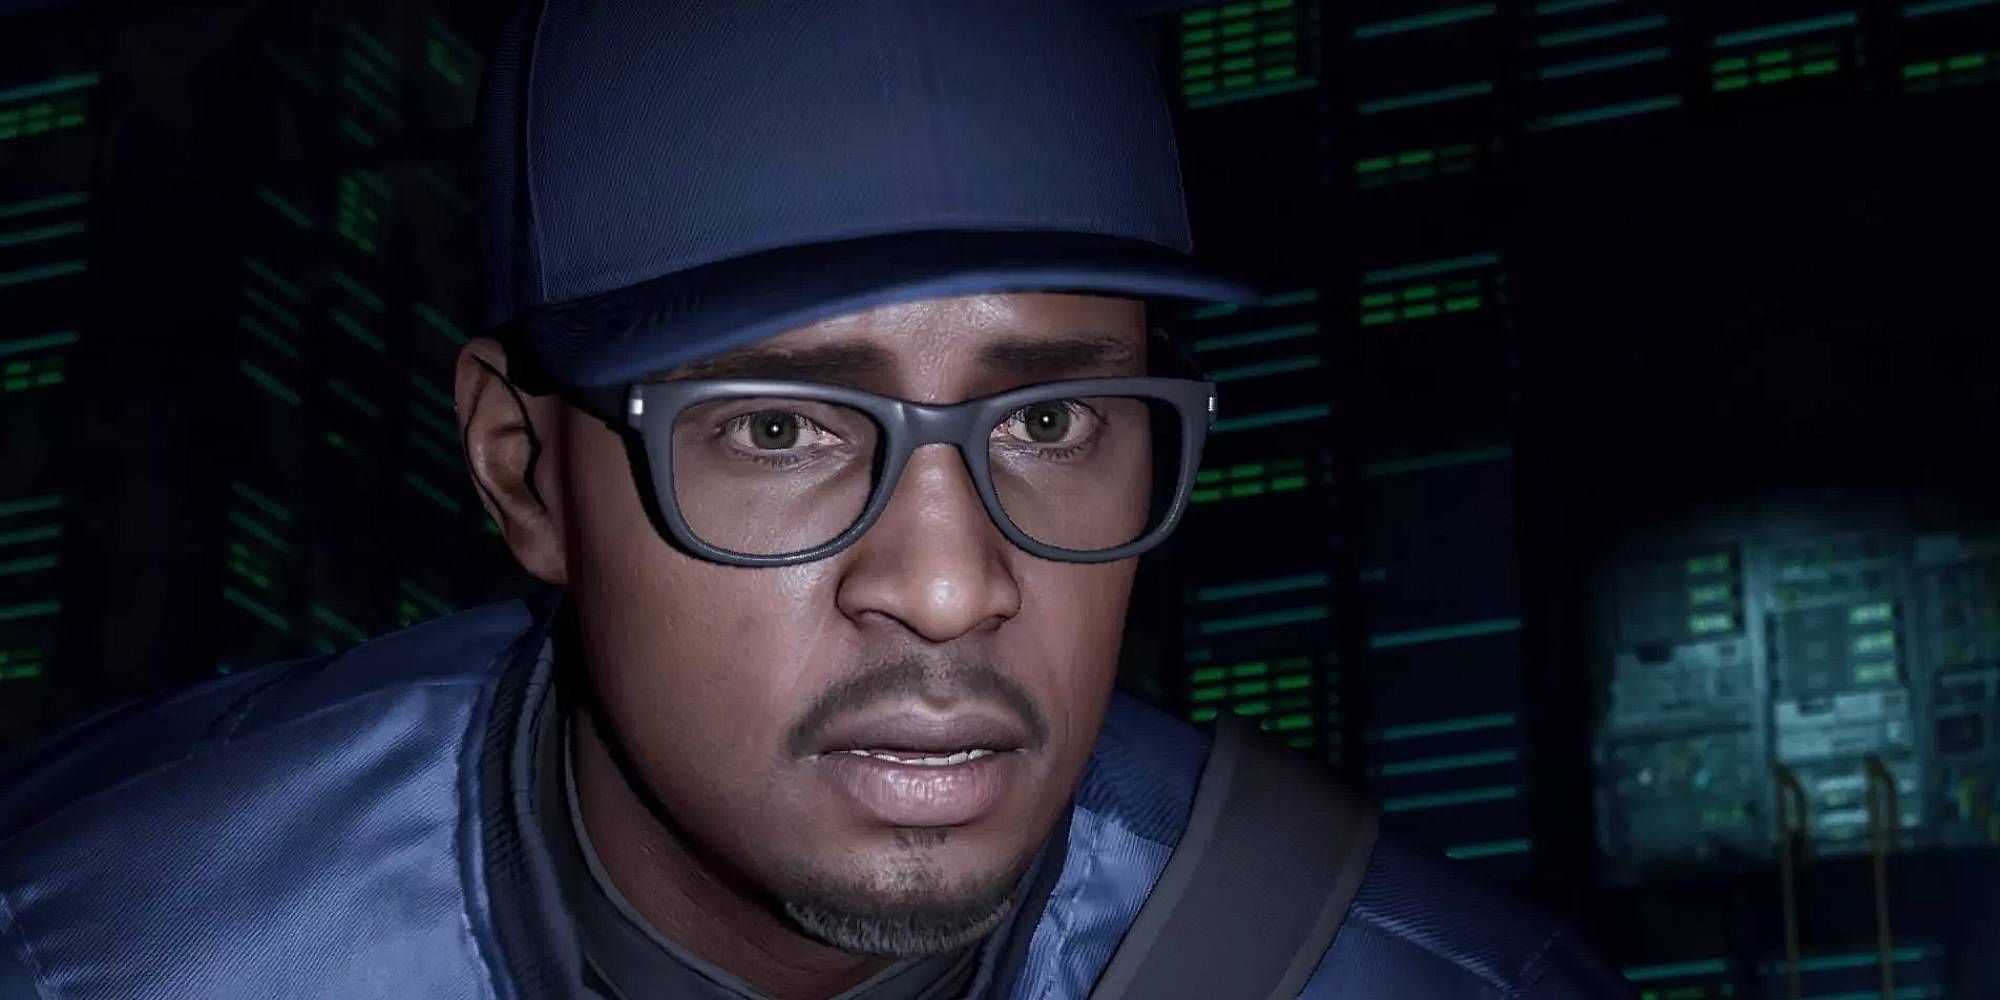 Watch Dogs 2's Marcus Holloway looks worried in the server room